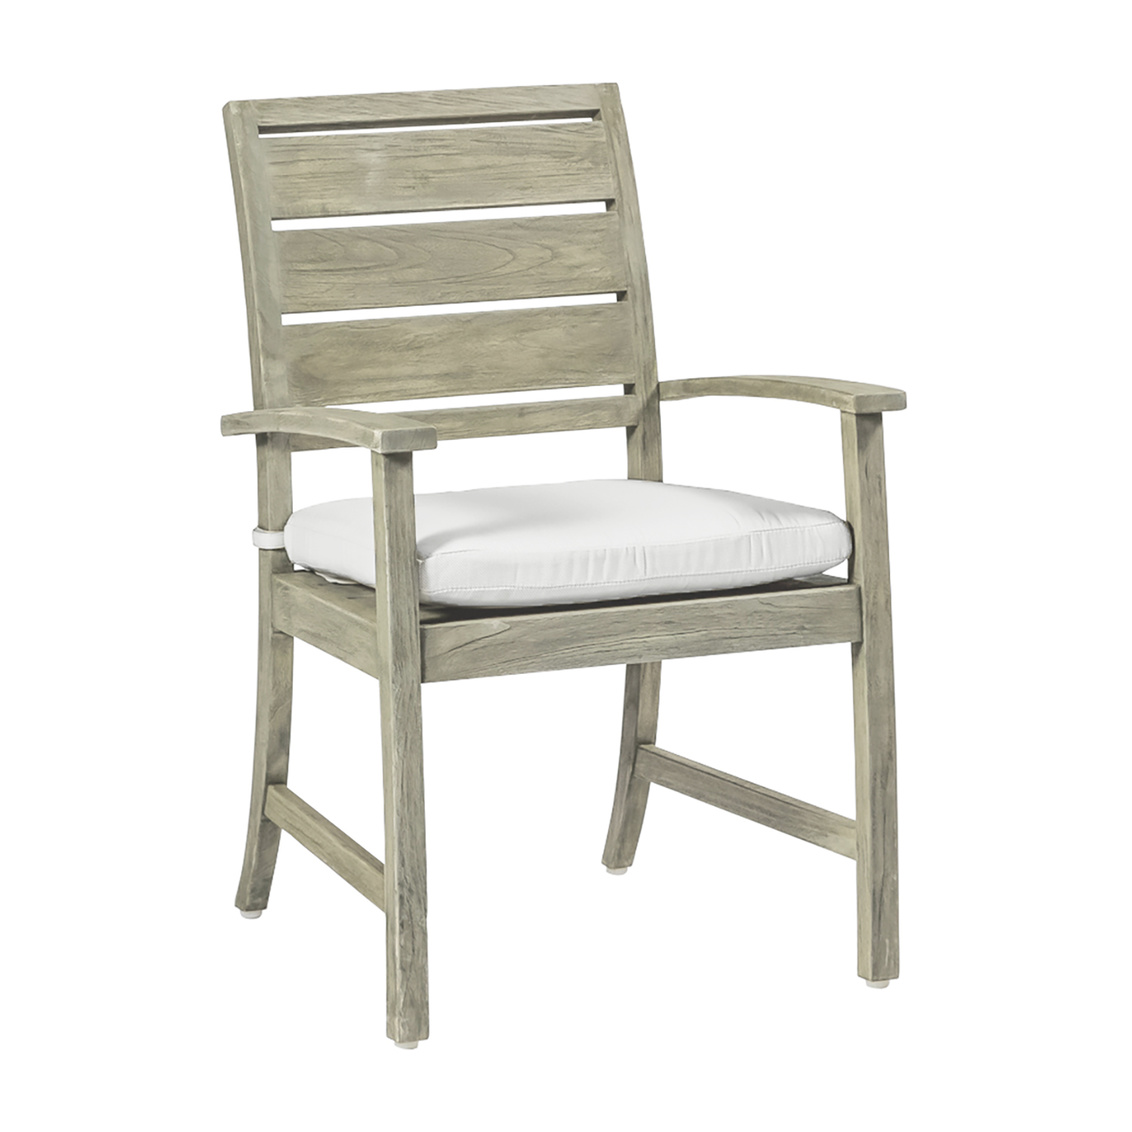 charleston teak arm chair in oyster teak – frame only product image